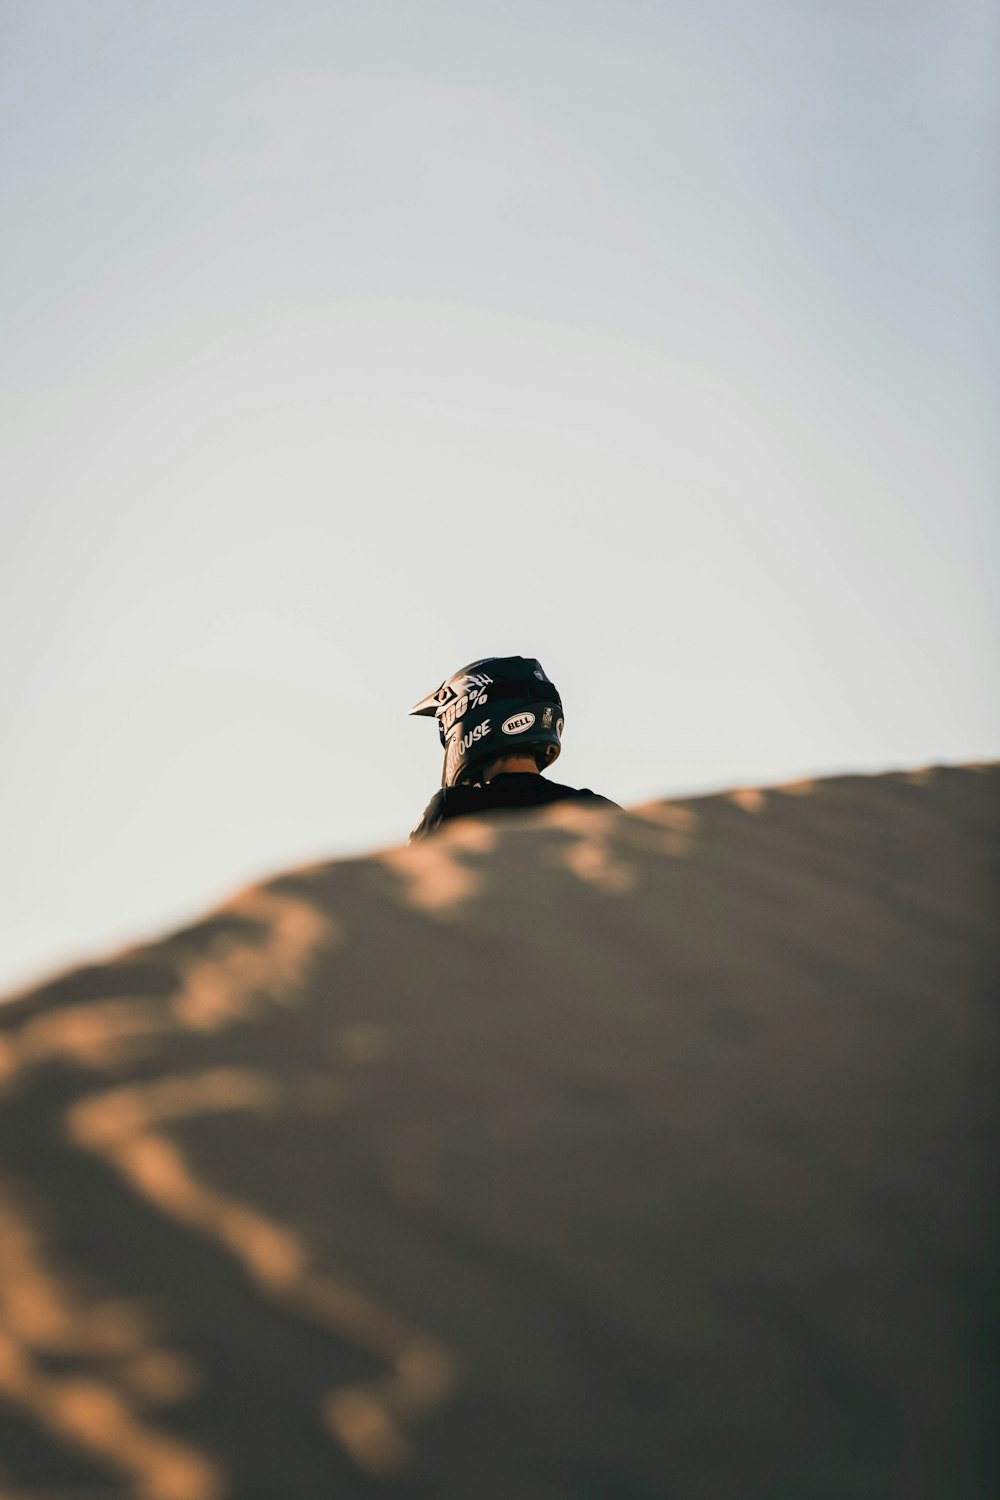 black and white bird on brown rock